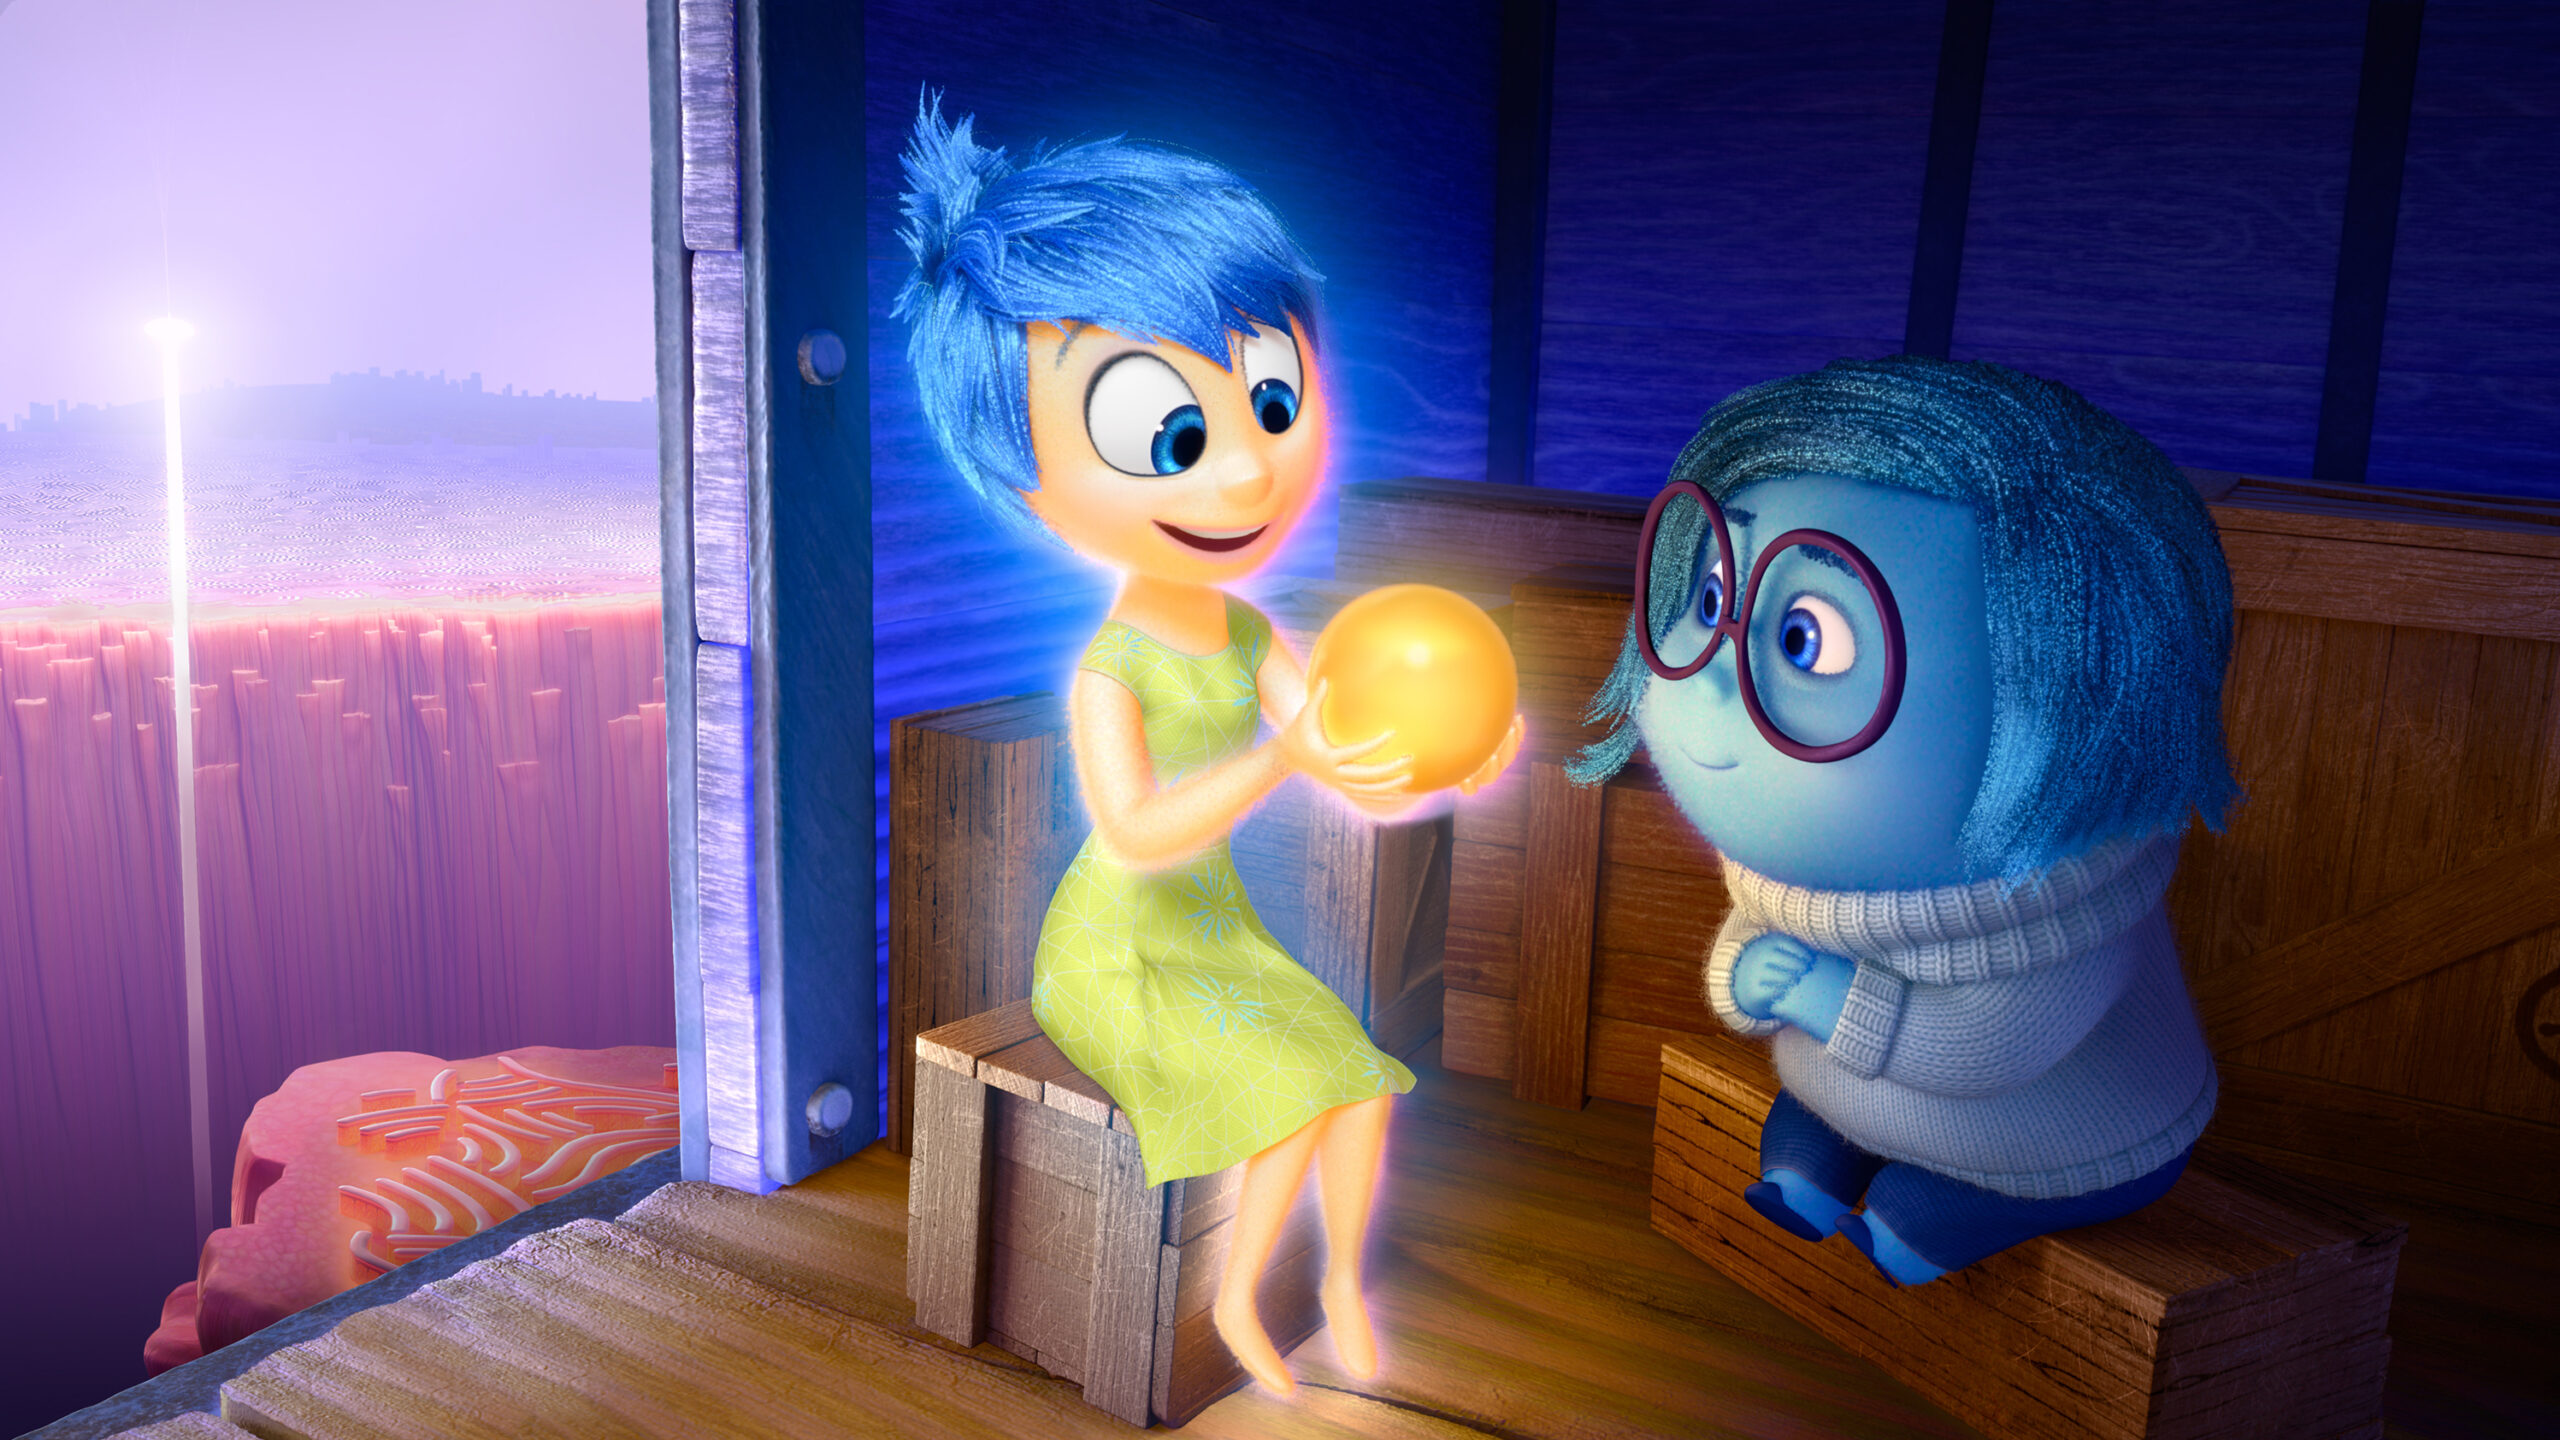 How Inside Out 2 Connects with Catholic Faith Themes